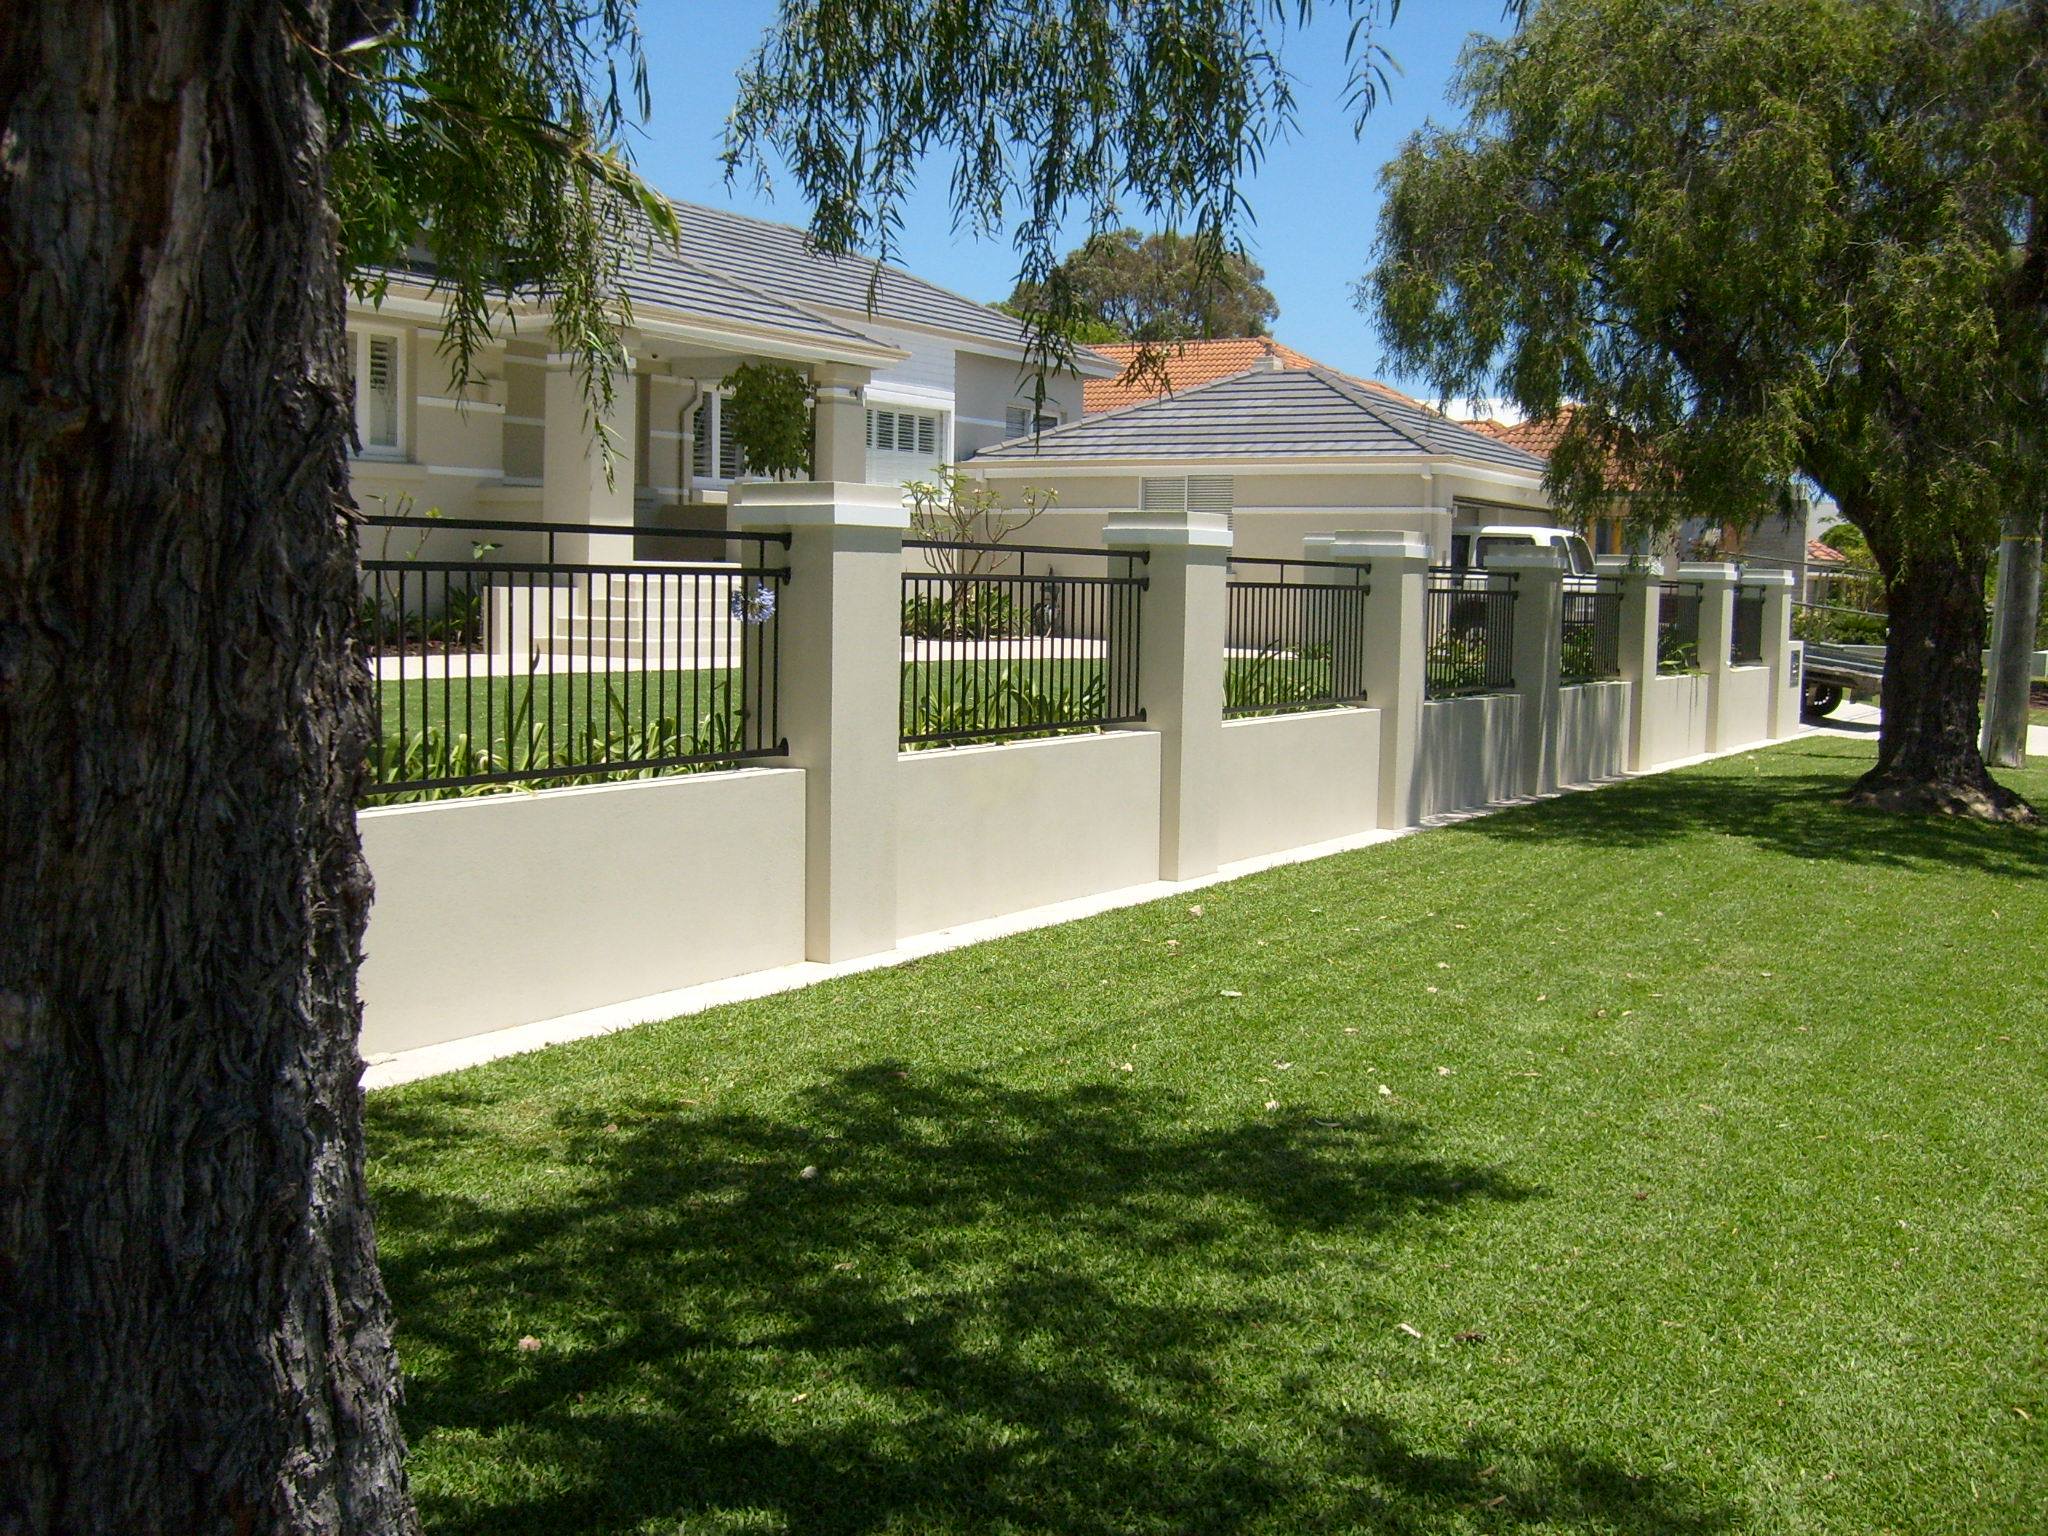 Feature Fencing Perth